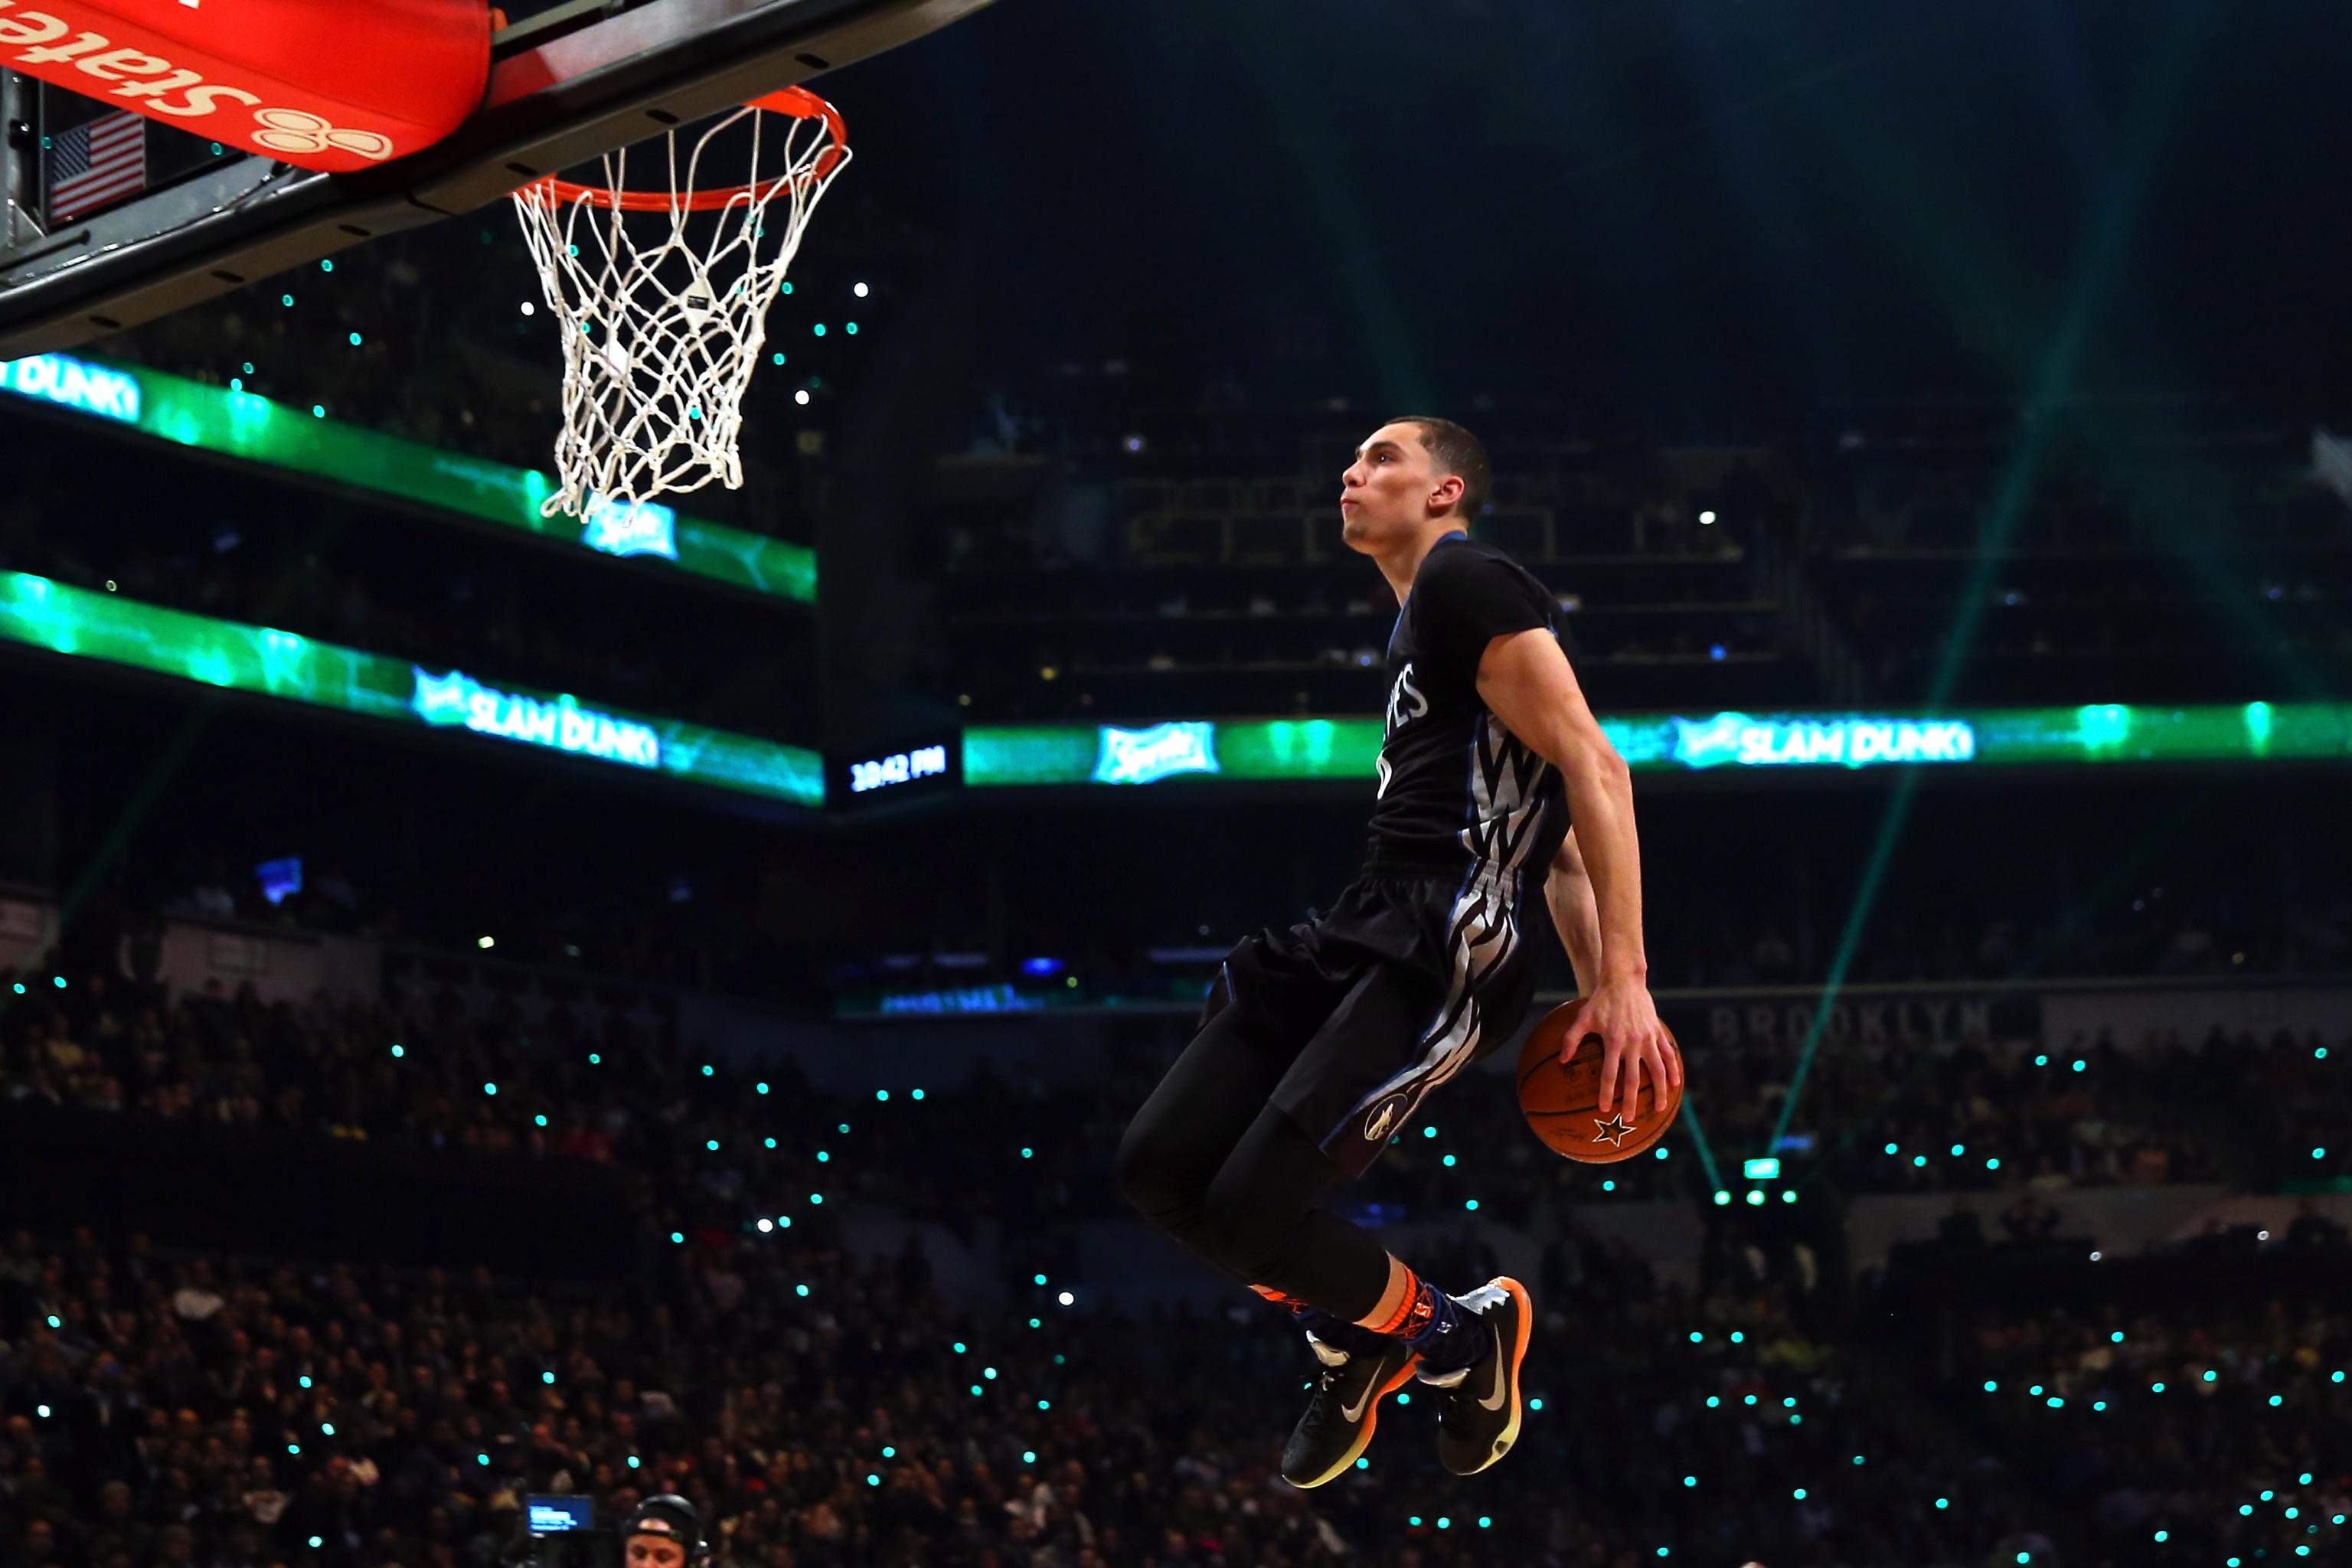 Nba Slam Dunk Contest 15 Highlights And Analysis Of All Star Weekend Event Bleacher Report Latest News Videos And Highlights